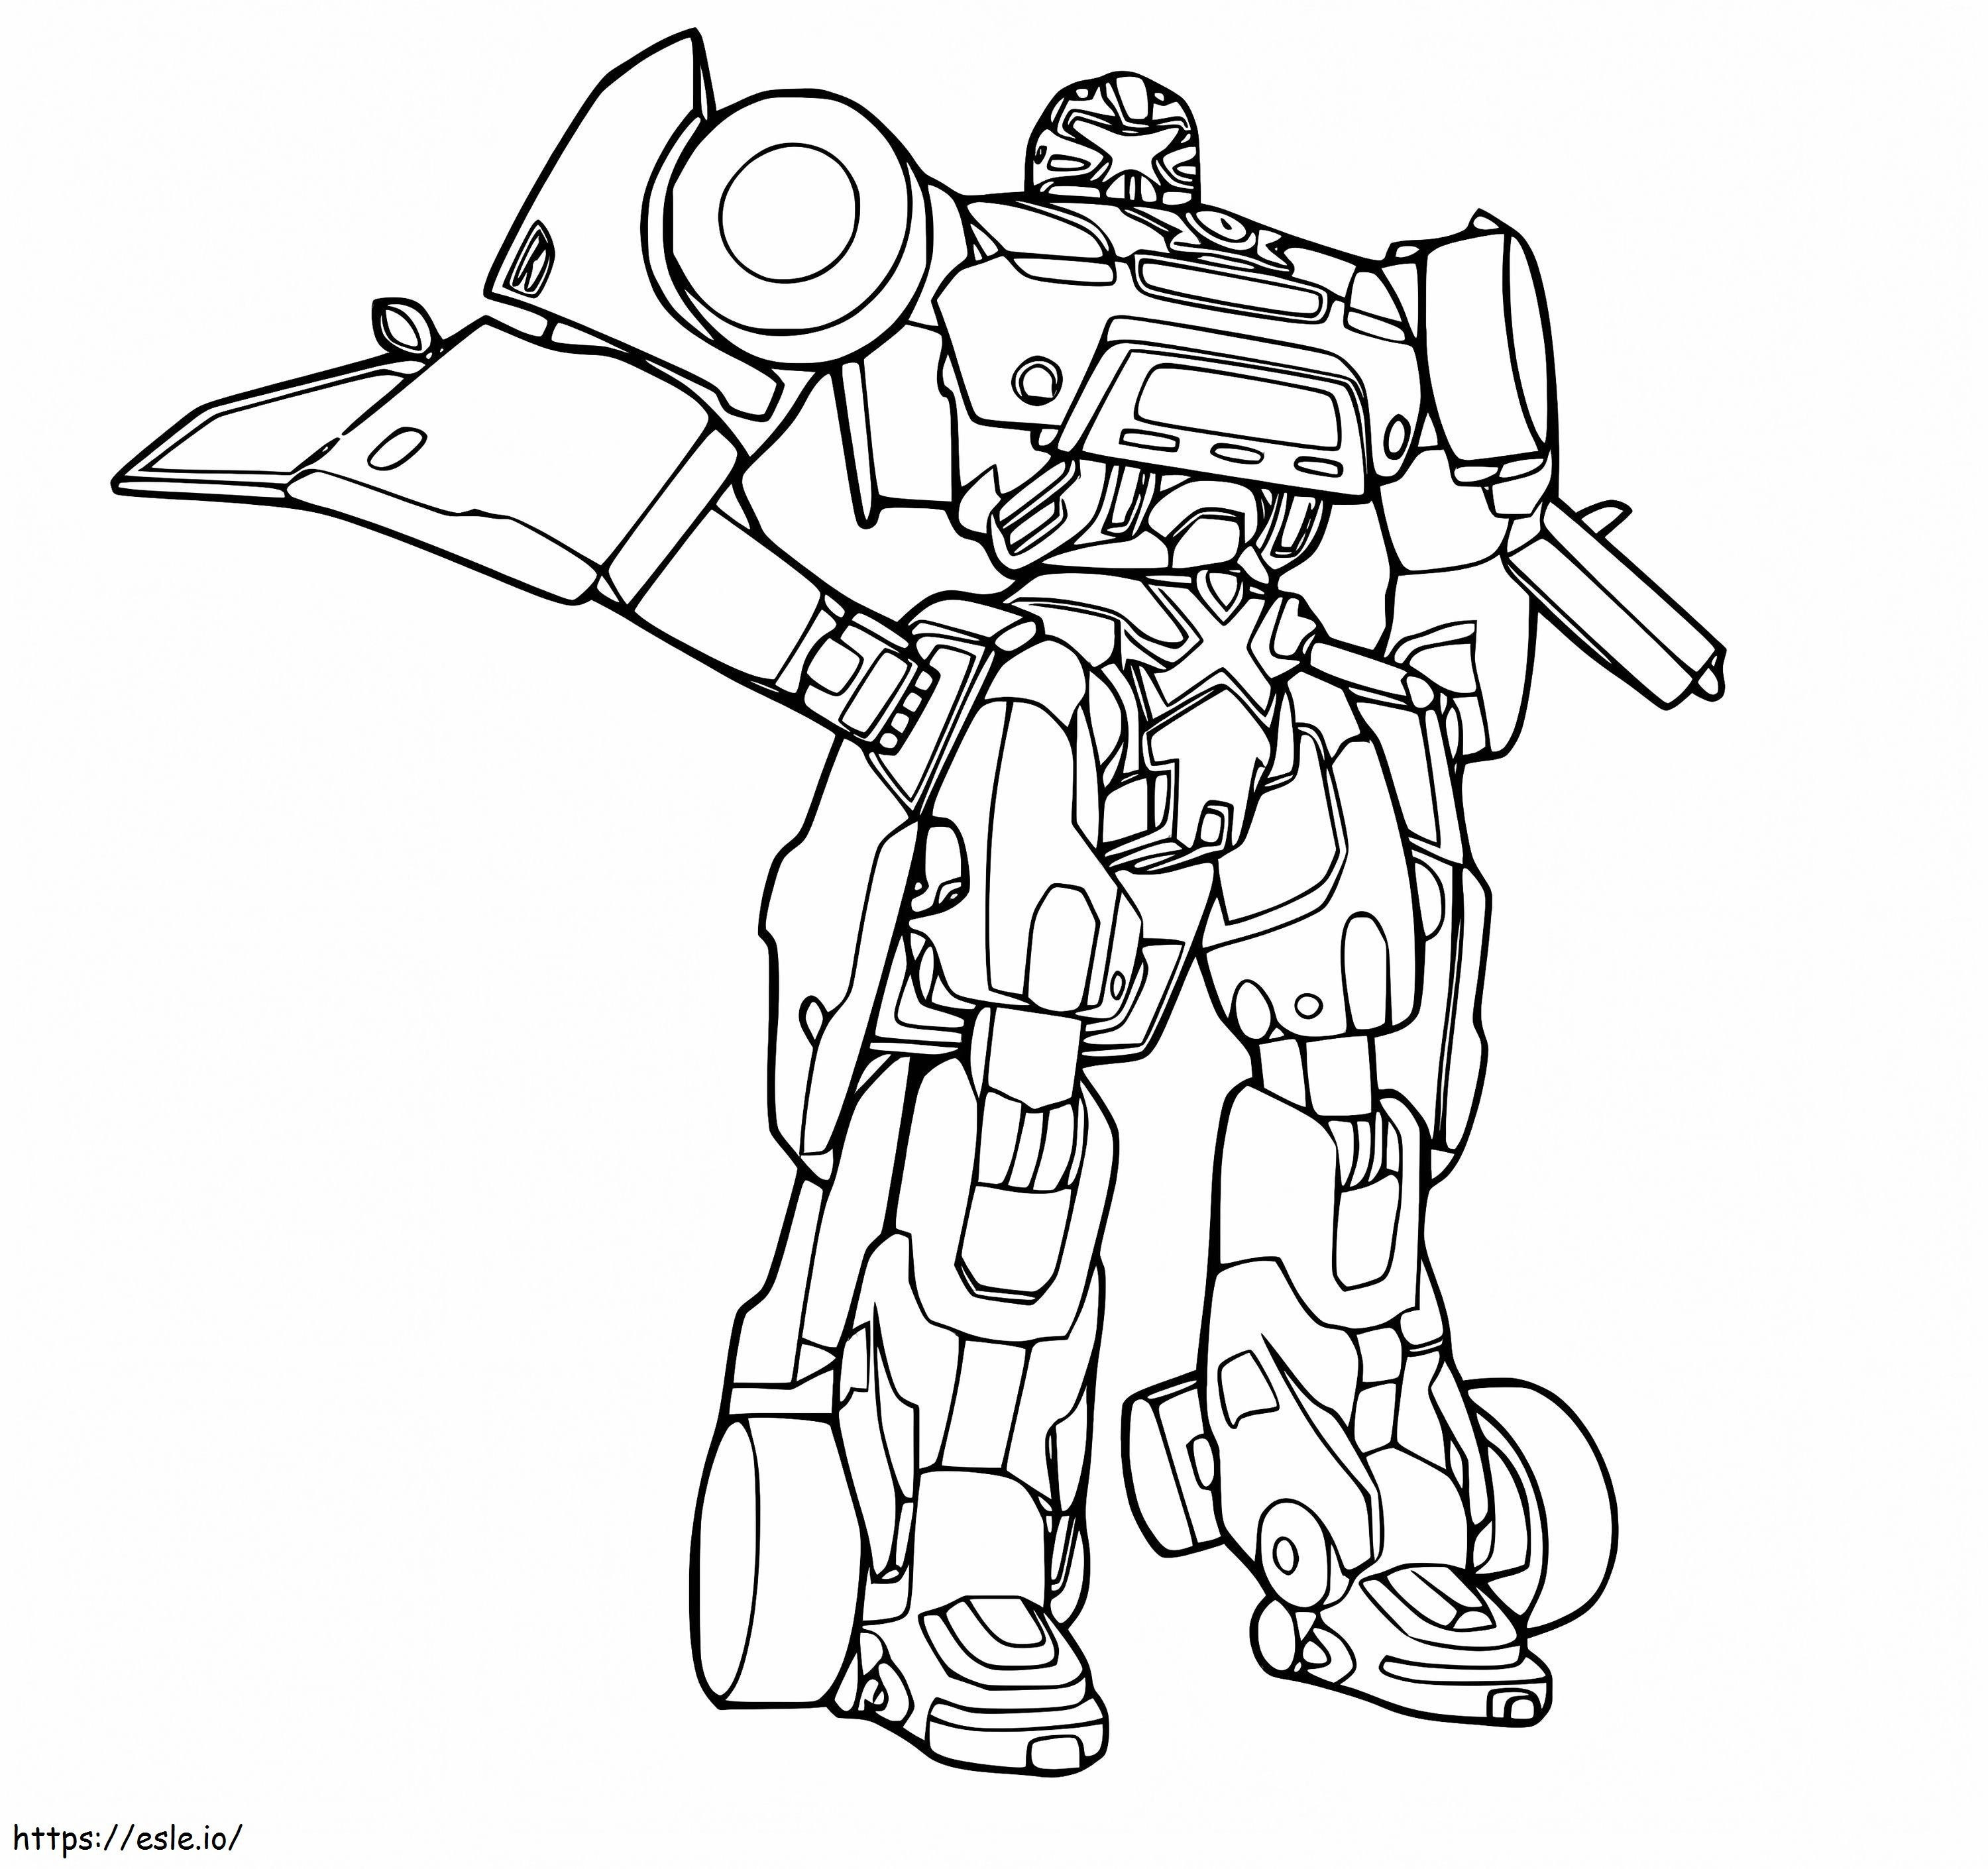 Tobot X coloring page